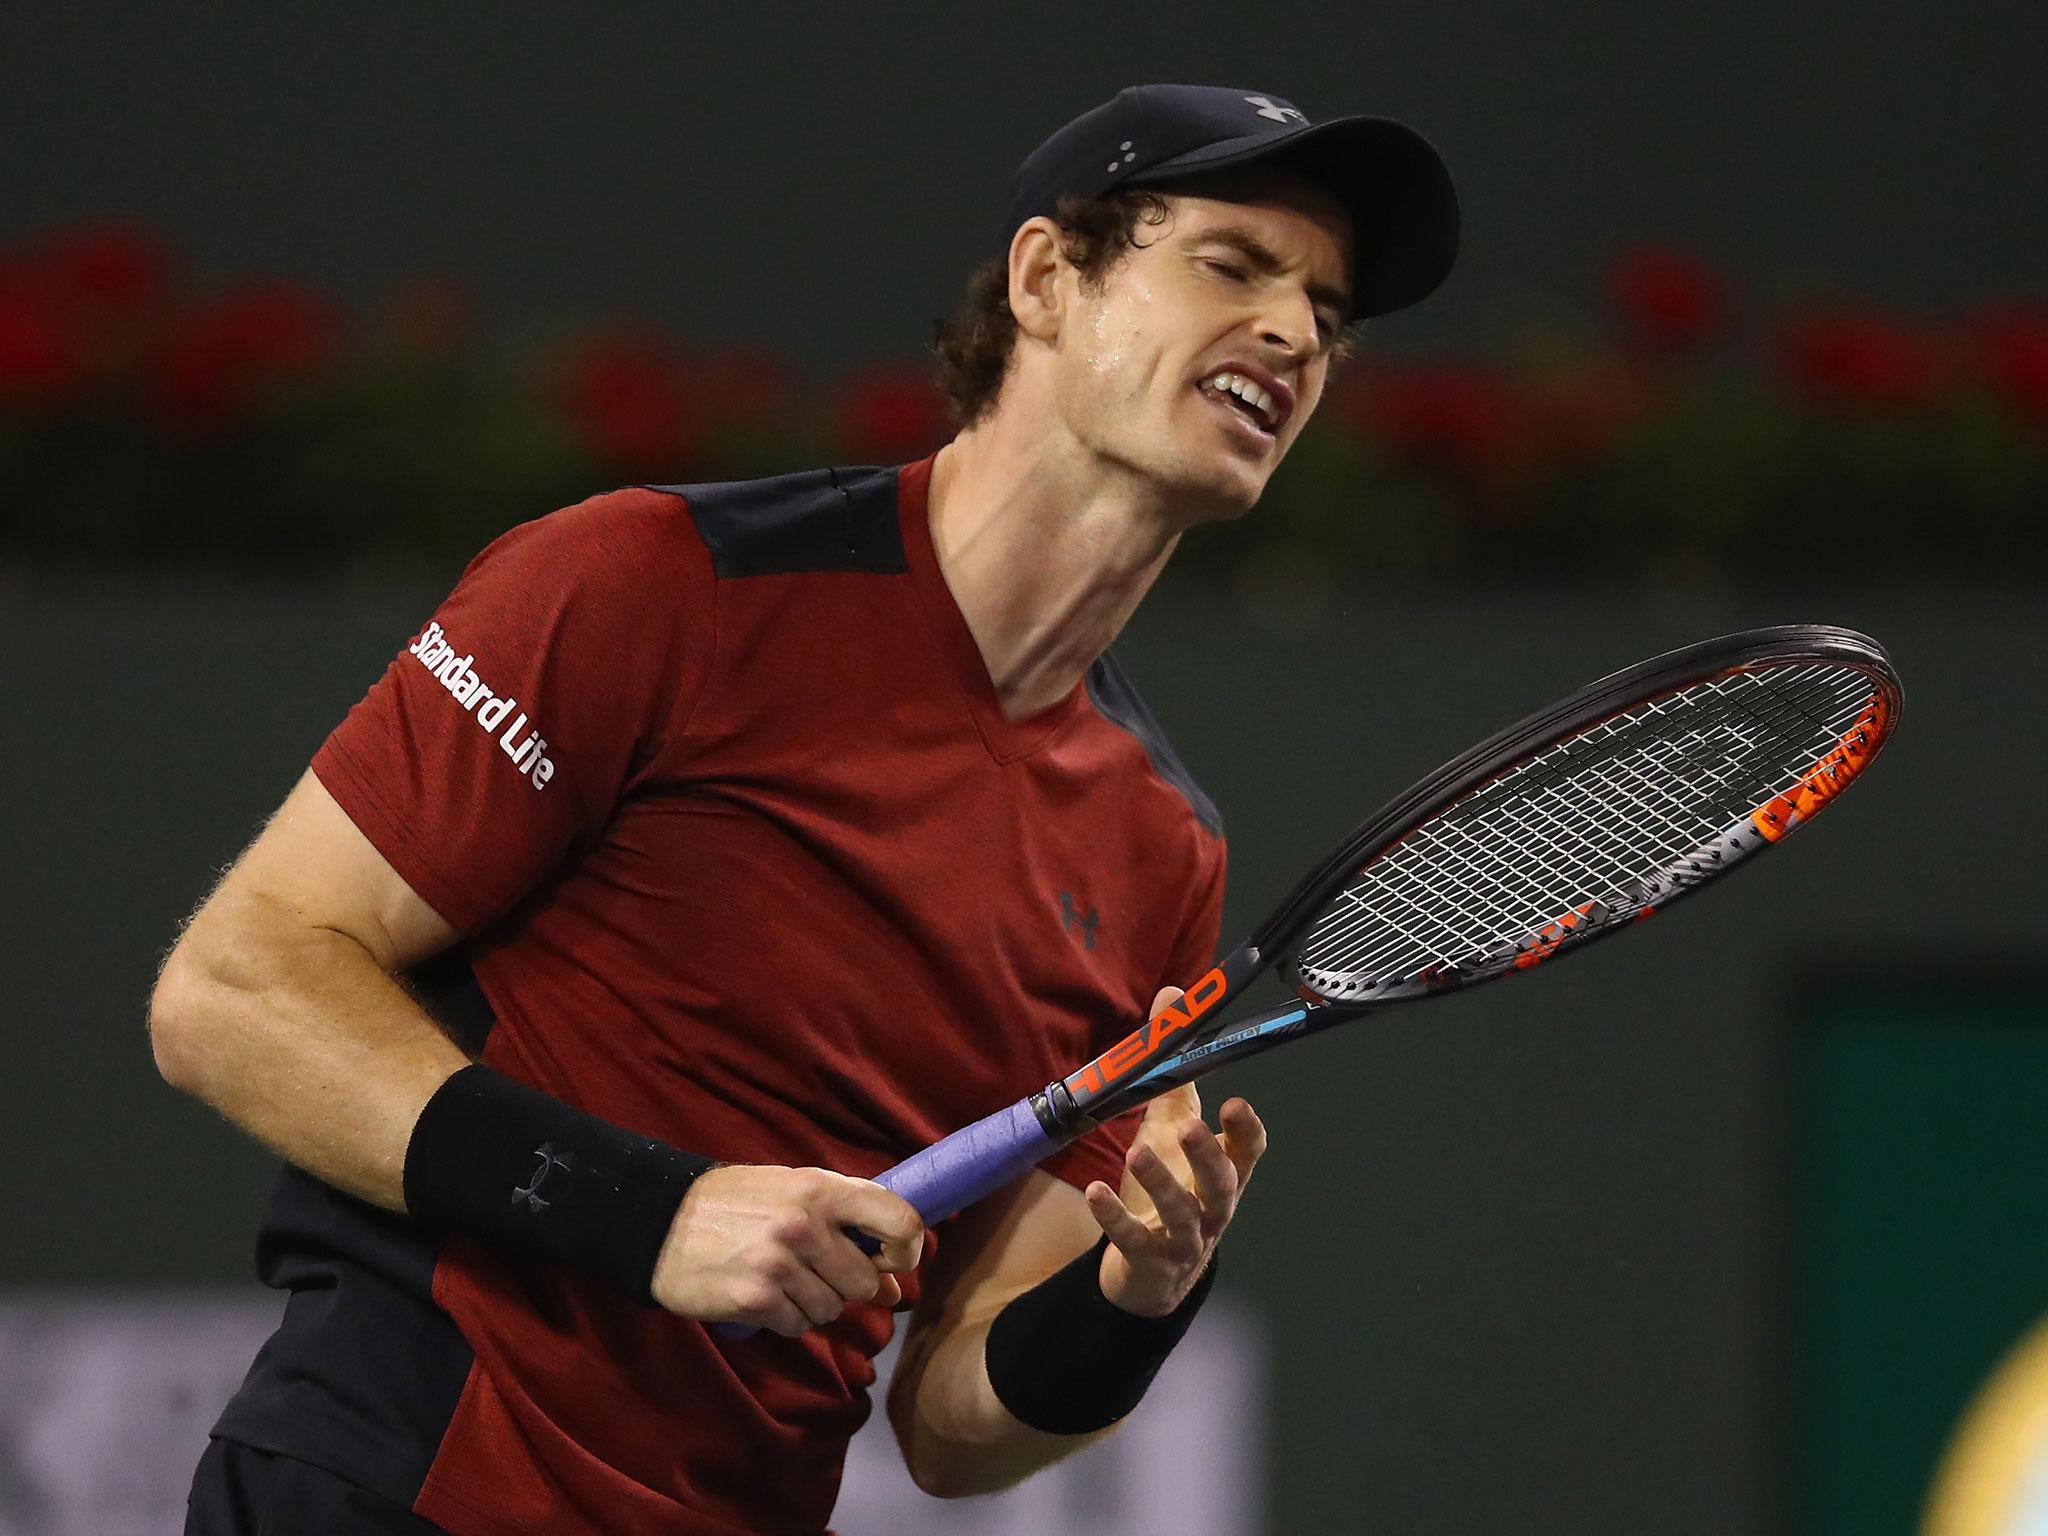 Andy Murray will miss Great Britain's Davis Cup tie next week